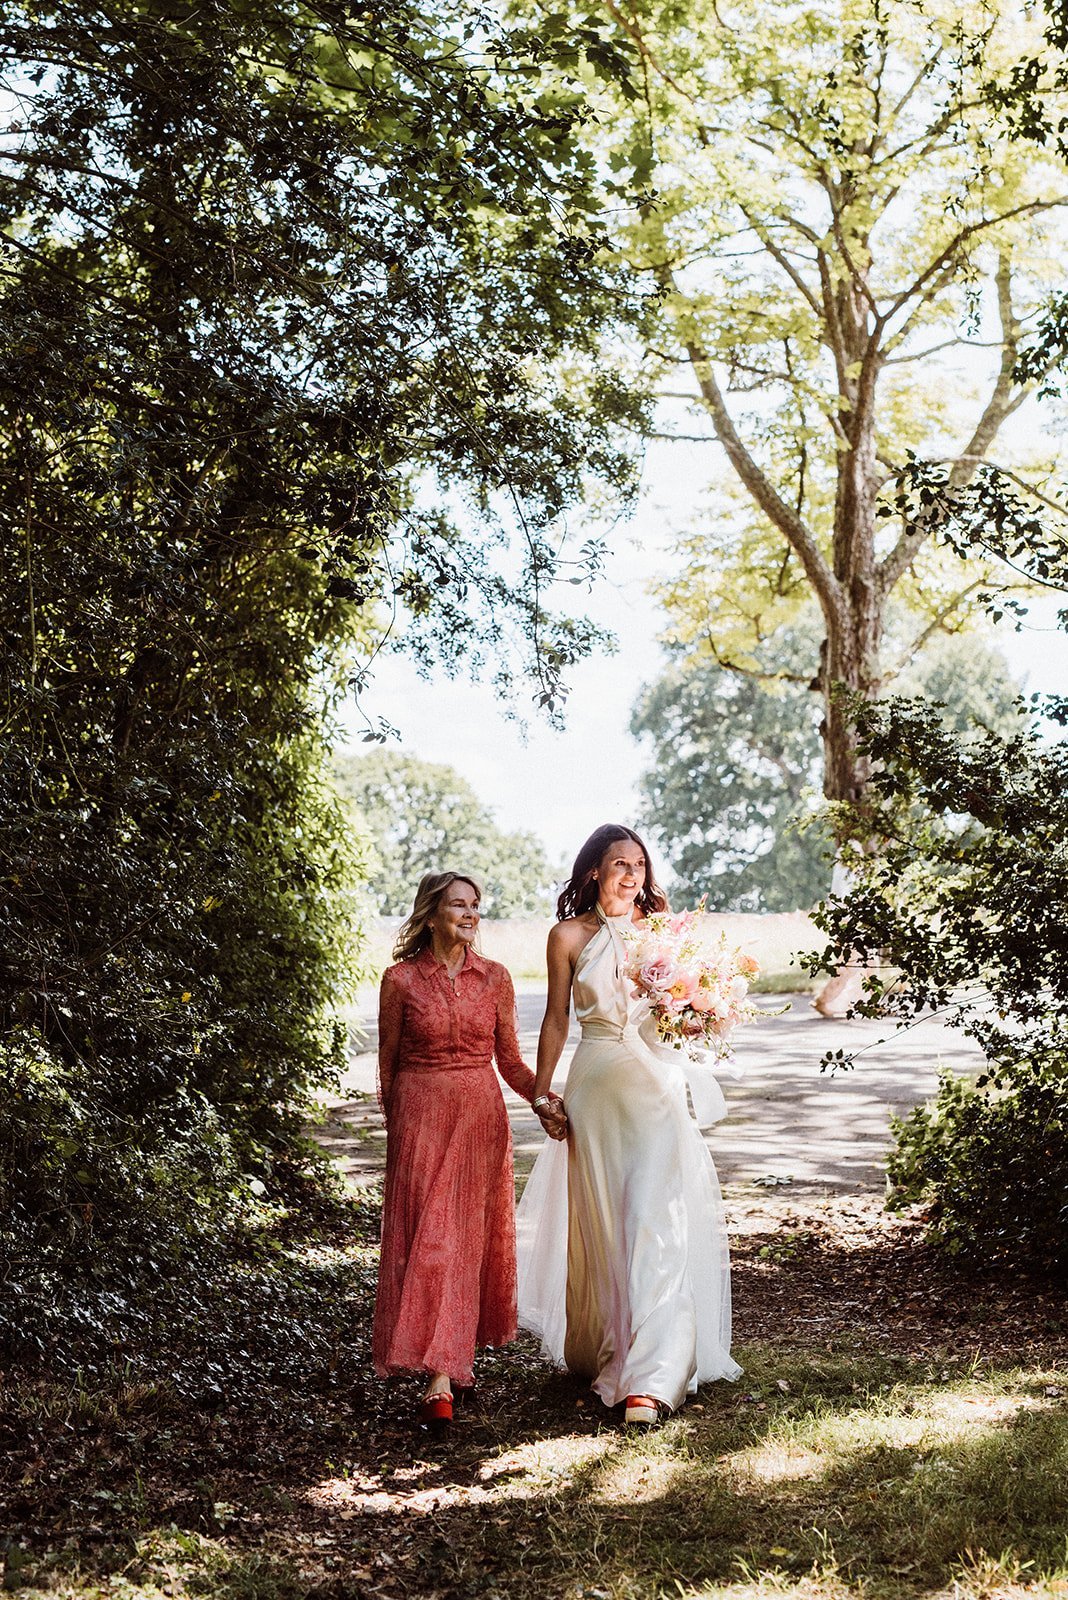 Beautiful bride Tallulah wore a wedding dress by Halfpenny London on her big day